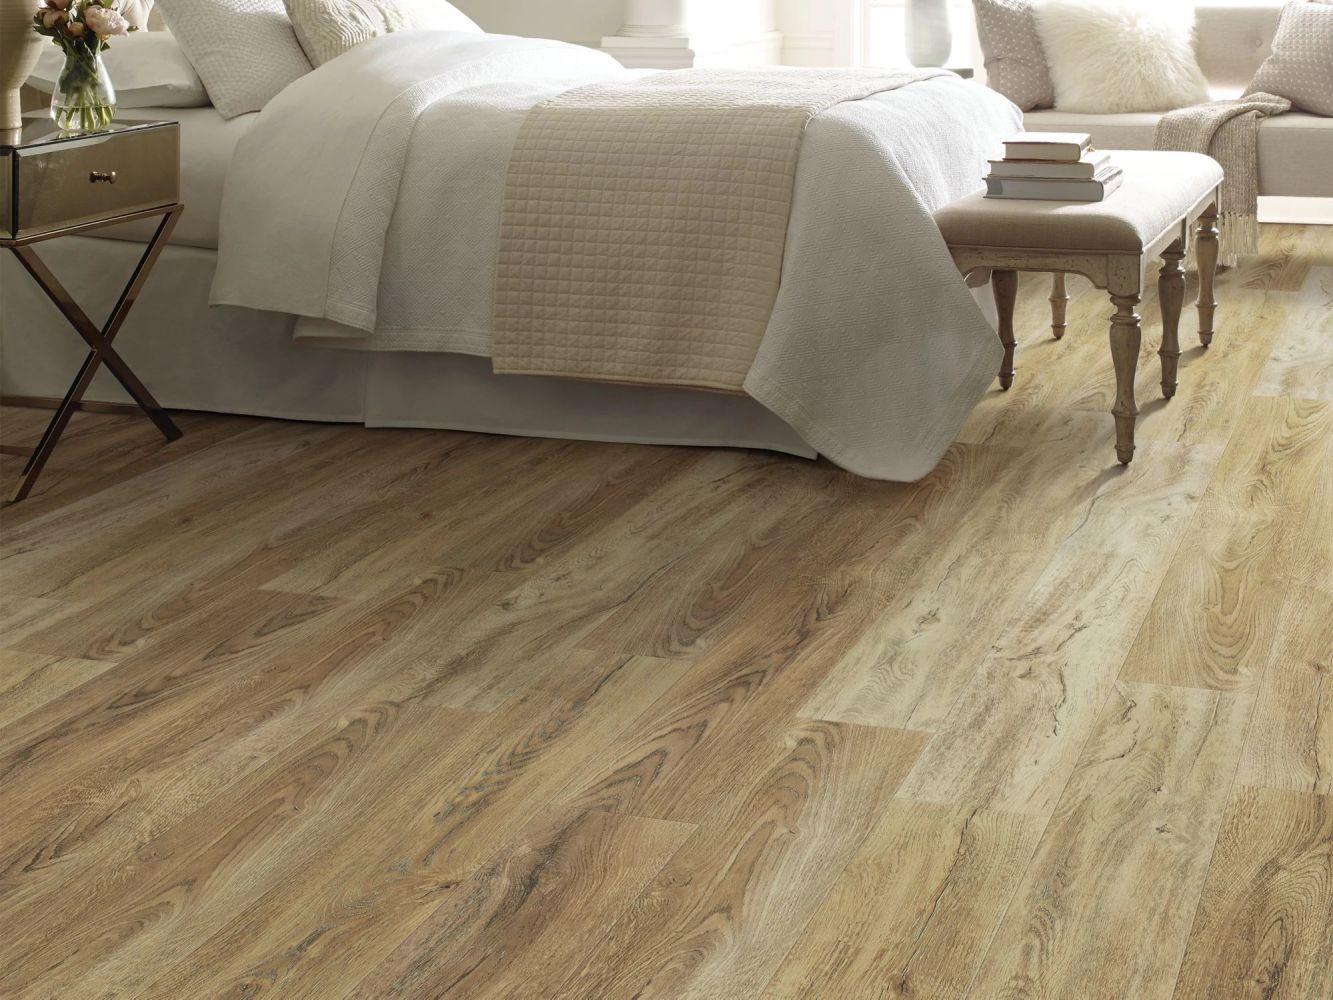 Shaw Floors Resilient Residential Pantheon HD Plus Foresta 00282_2001V